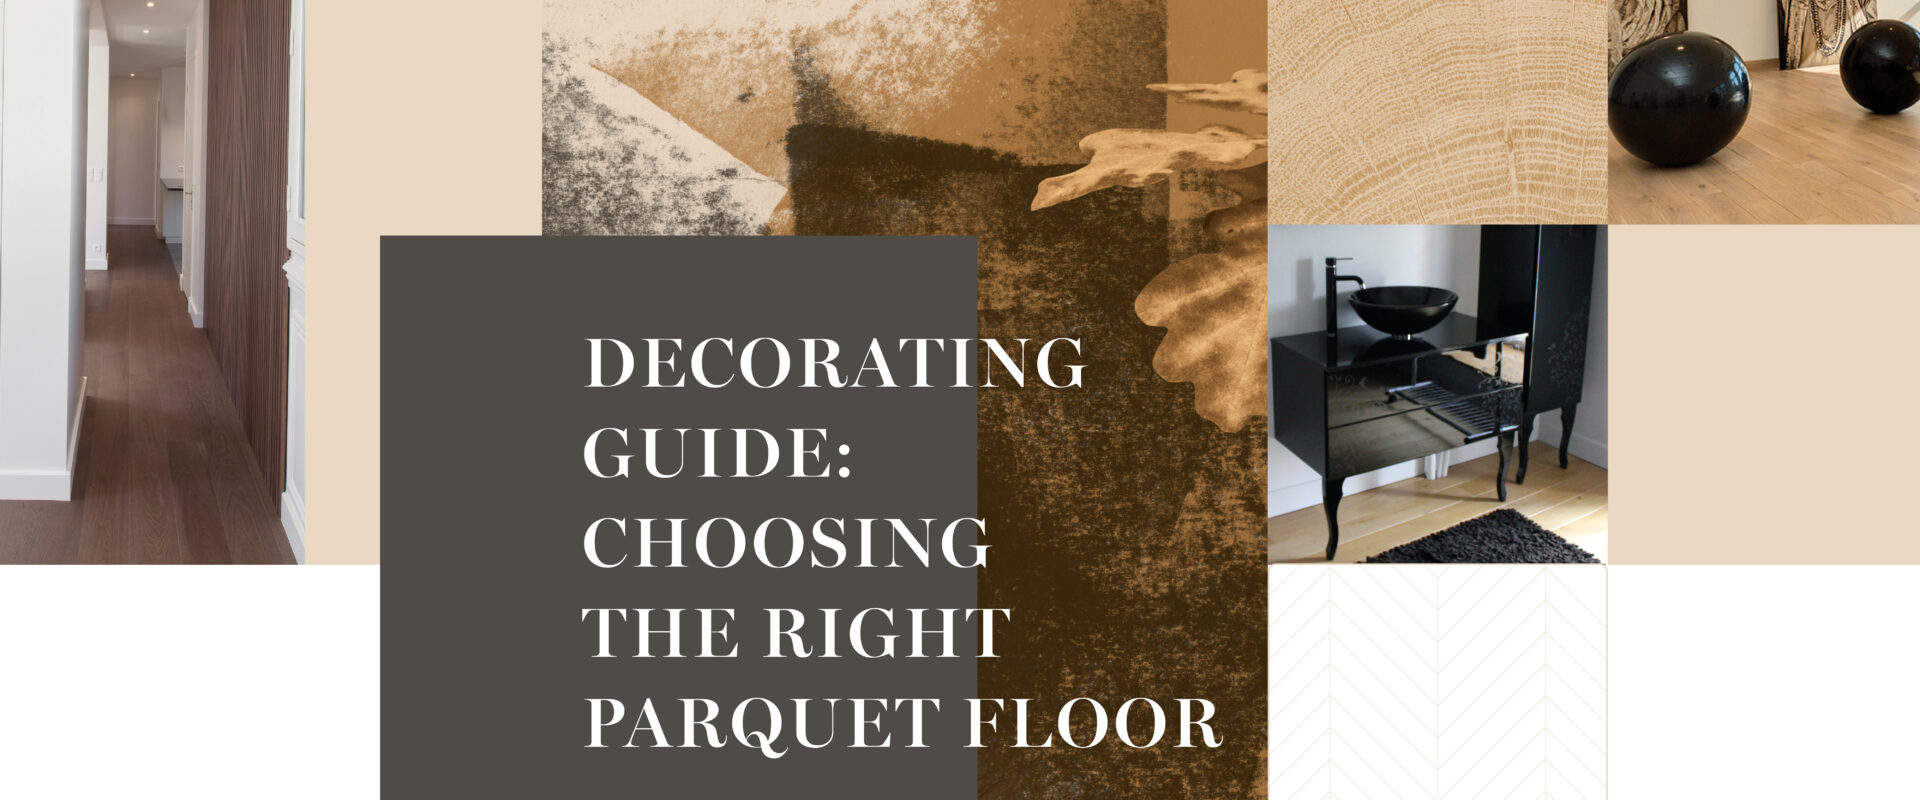 Decorating guide: Choosing the right parquet floor